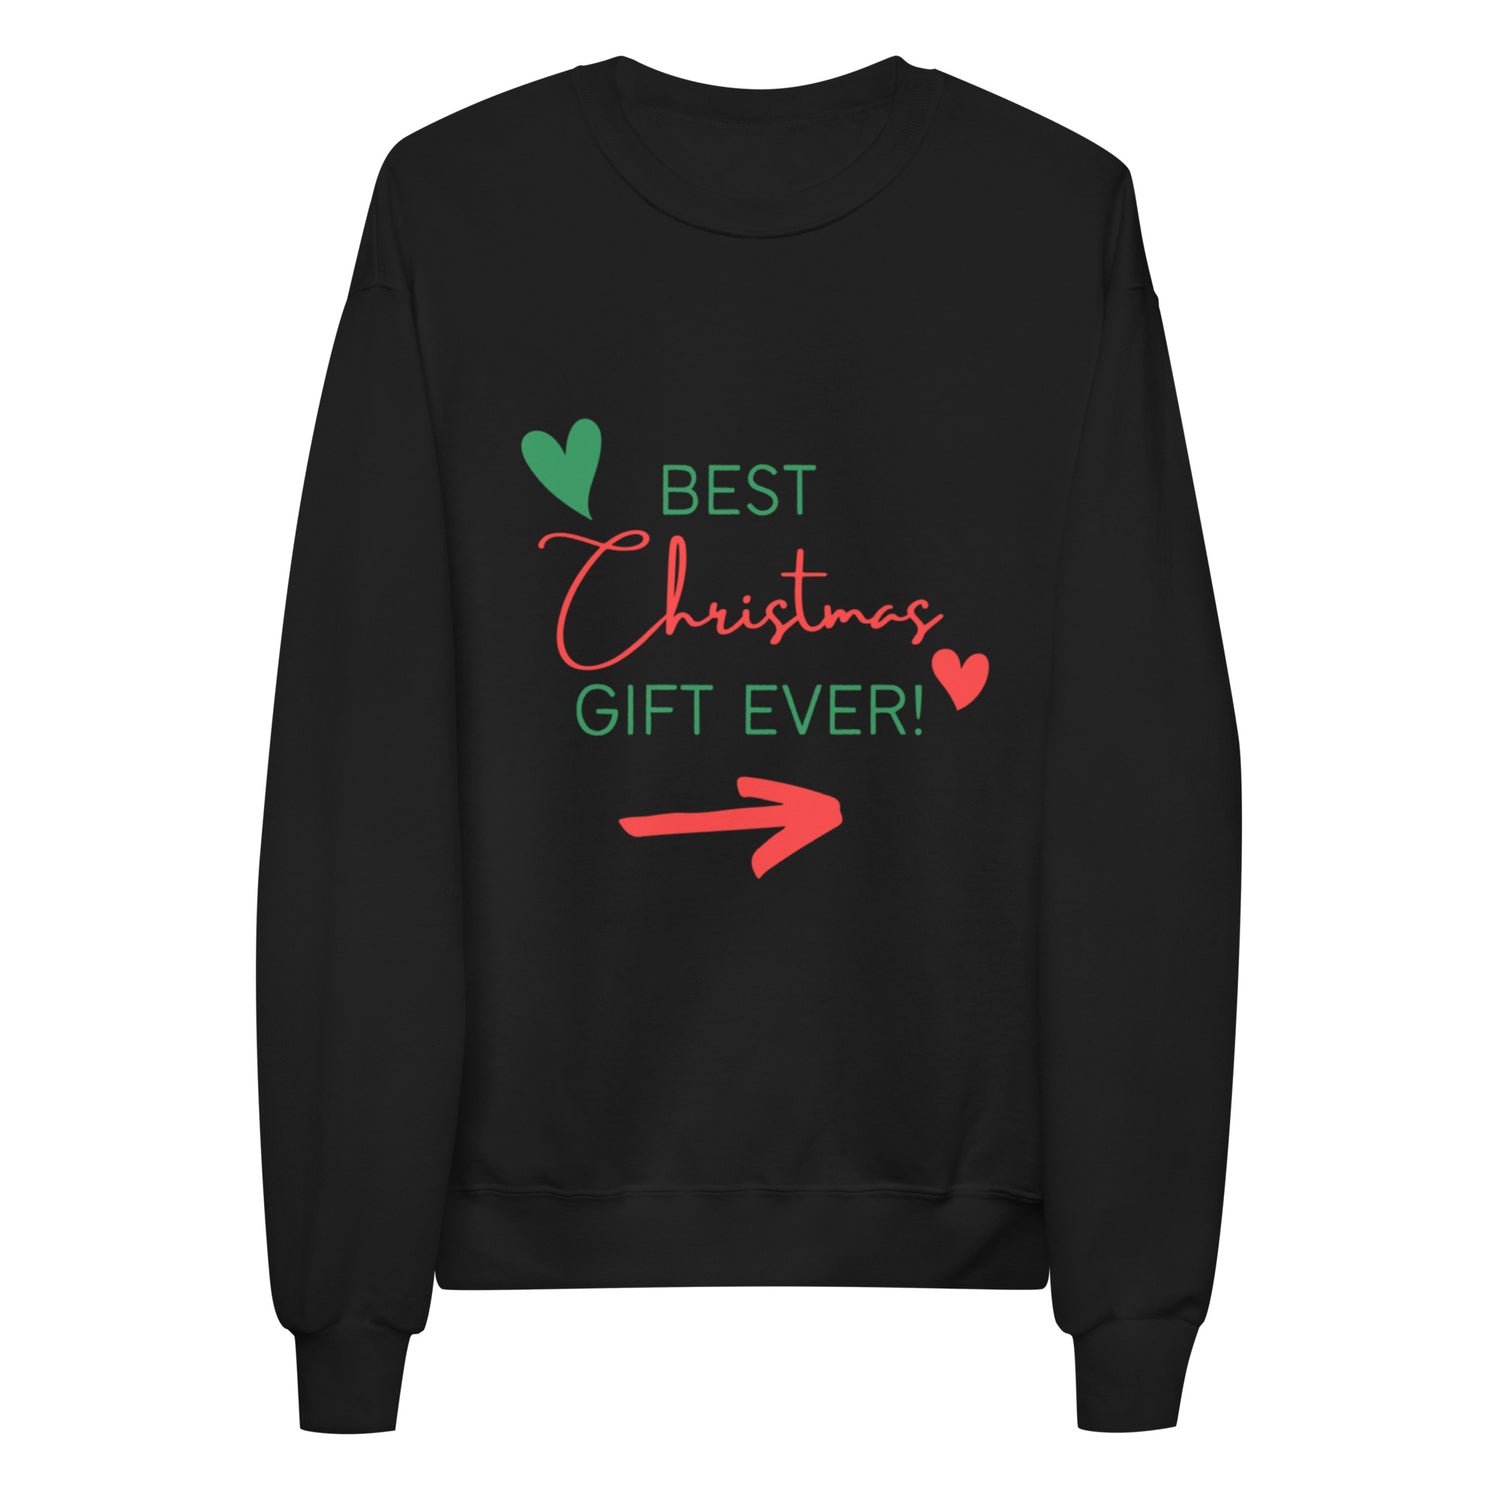 Christmas T-shirts and sweatshirts for couples, lovers and partners. Make a statement this holiday season alongside your favorite person! Stationery For Lovers limited edition matching Christmas themed t-shirts and sweatshirts!